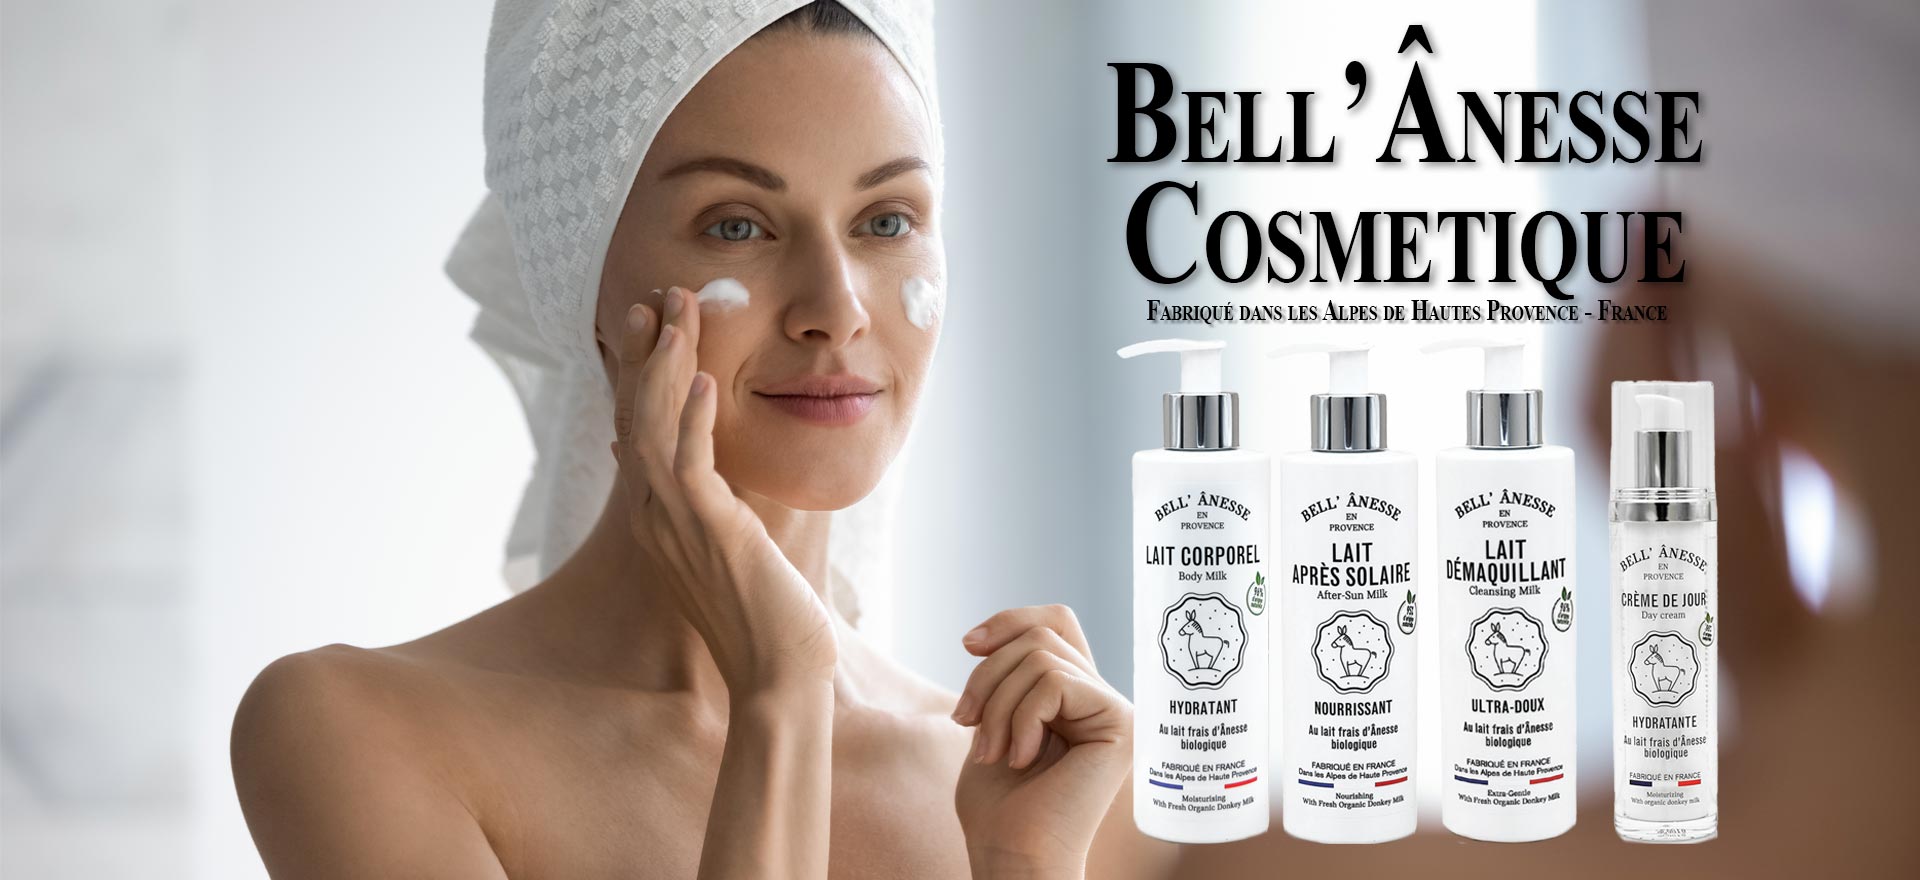 bell anesse cosmetique